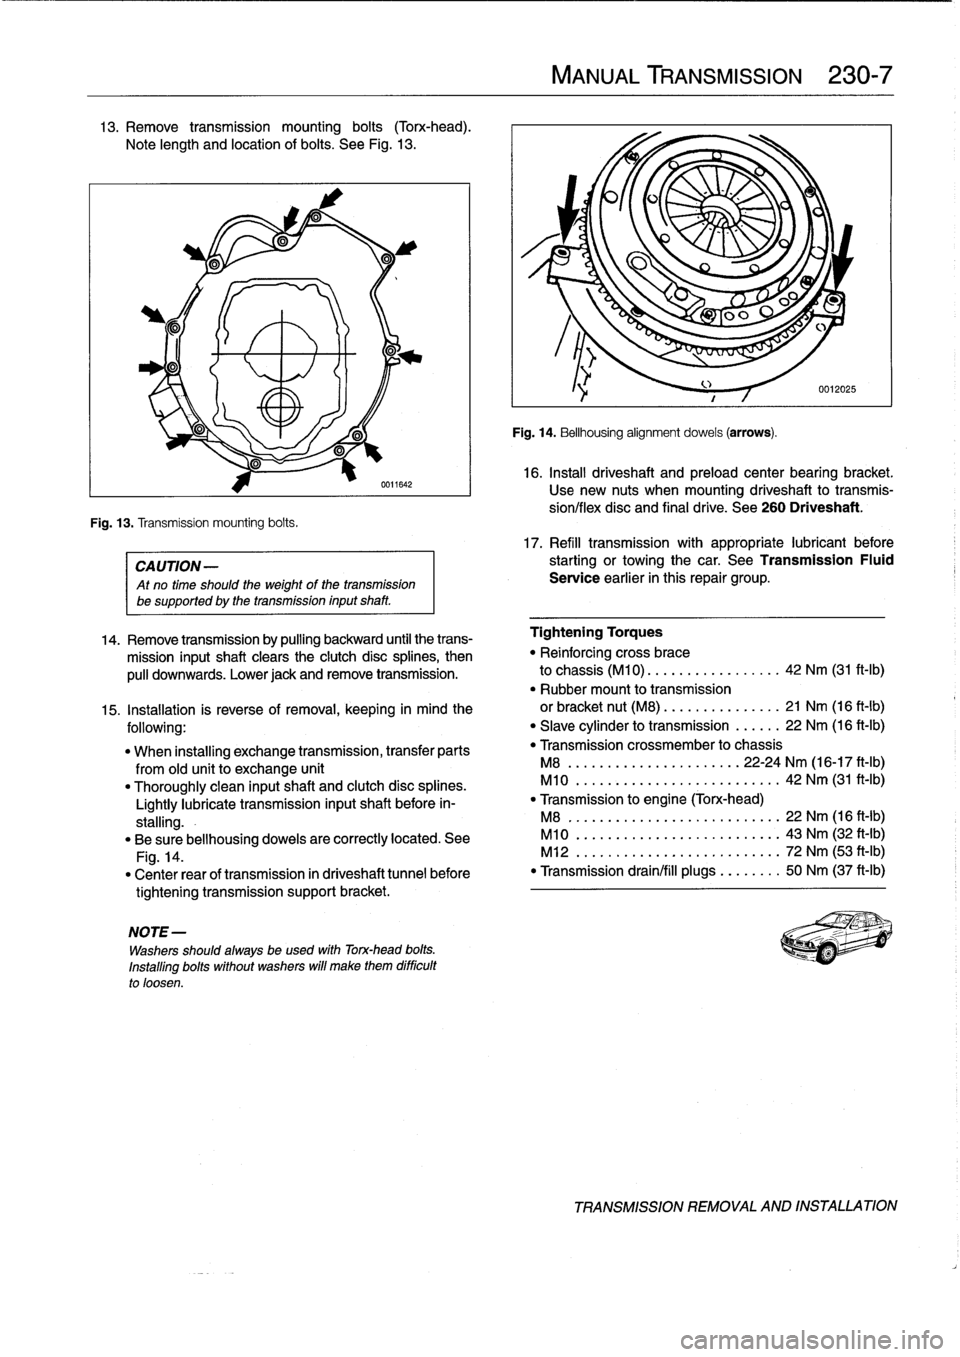 BMW 318i 1997 E36 Workshop Manual 13
.
Remove
transmission
mounting
bolts
(Torx-head)
.

Note
length
and
location
of
bolts
.
See
Fig
.
13
.

Fig
.
13
.
Transmission
mounting
bolts
.

0611642

CA
UTION-

Atno
time
should
the
weight
of
